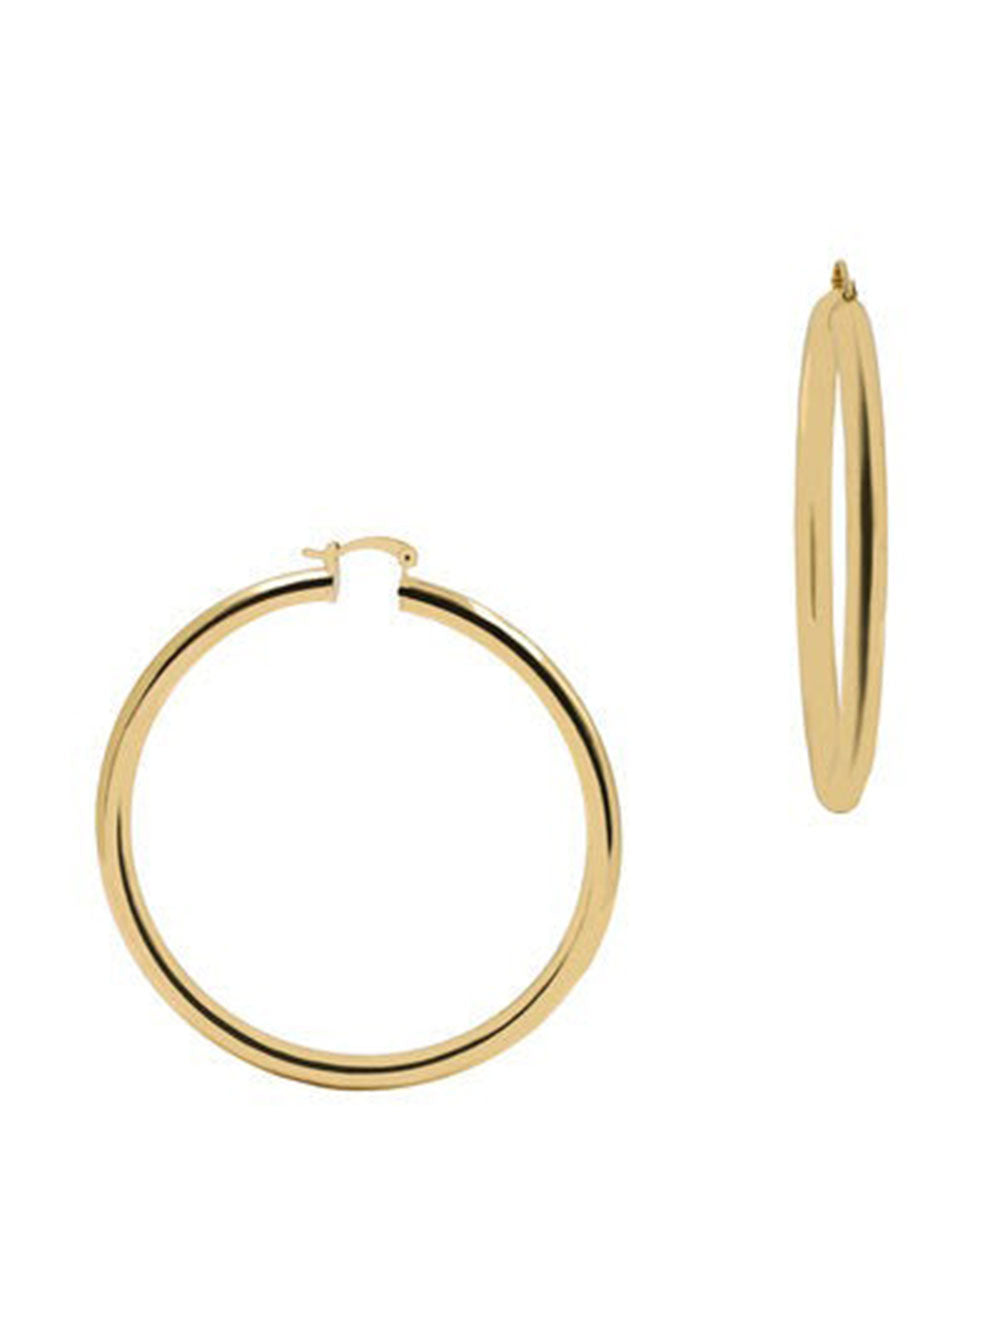 The M Jewelers The Large Tubed Hoops